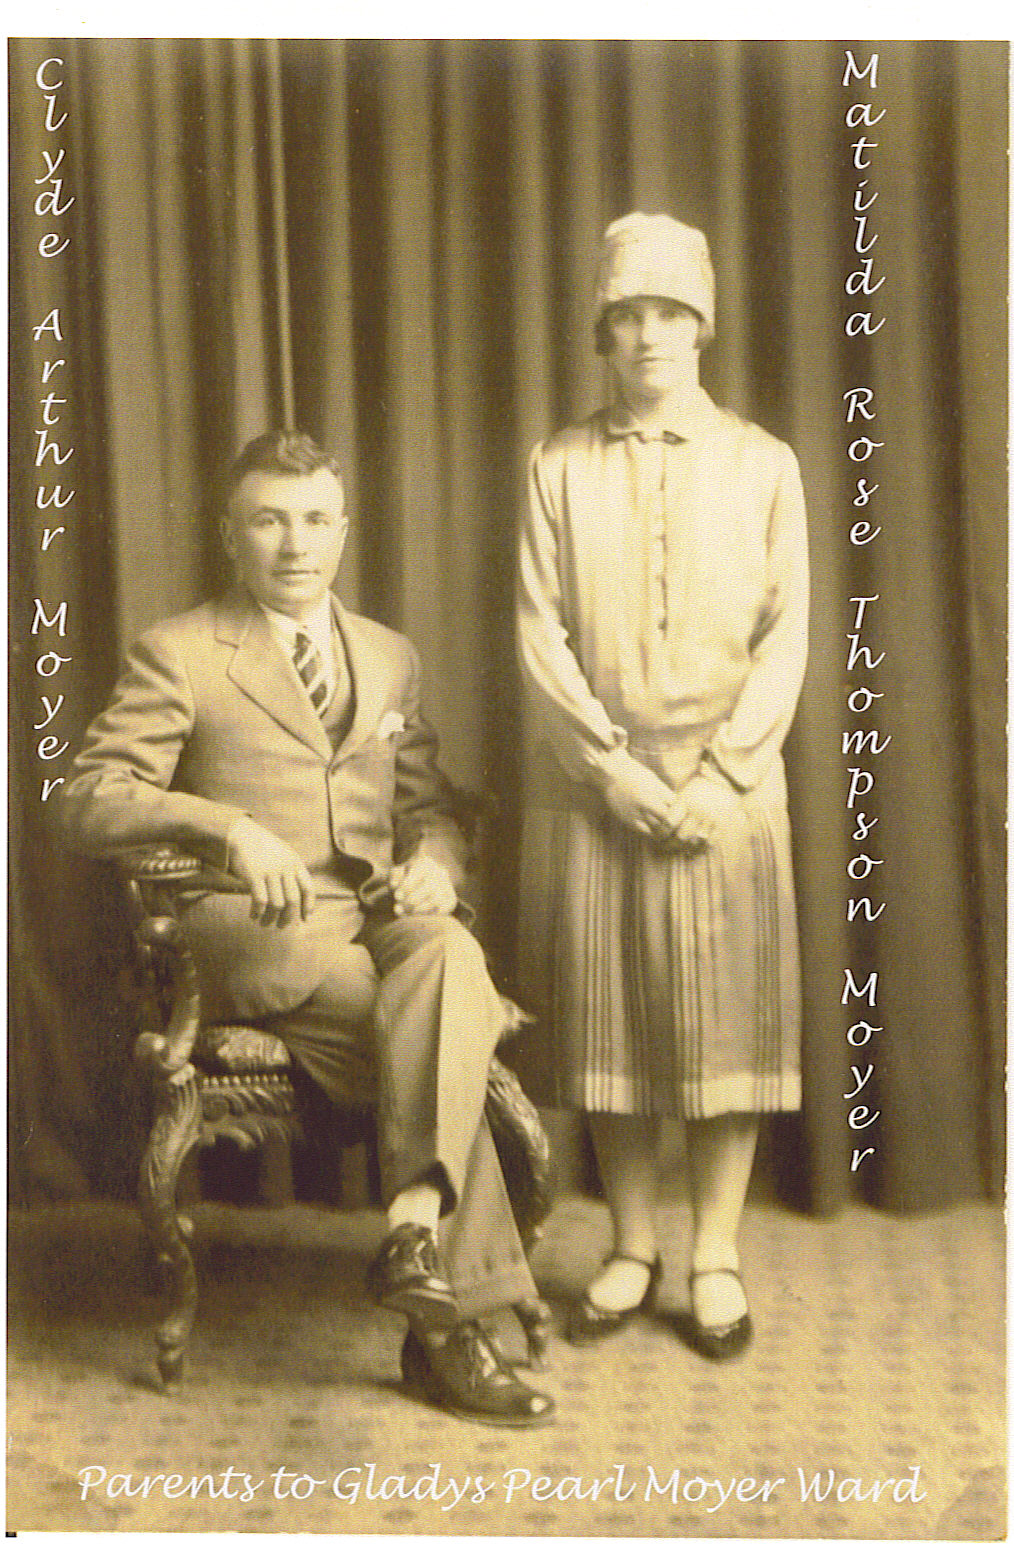 Photo of Clyde and Matilda Moyer